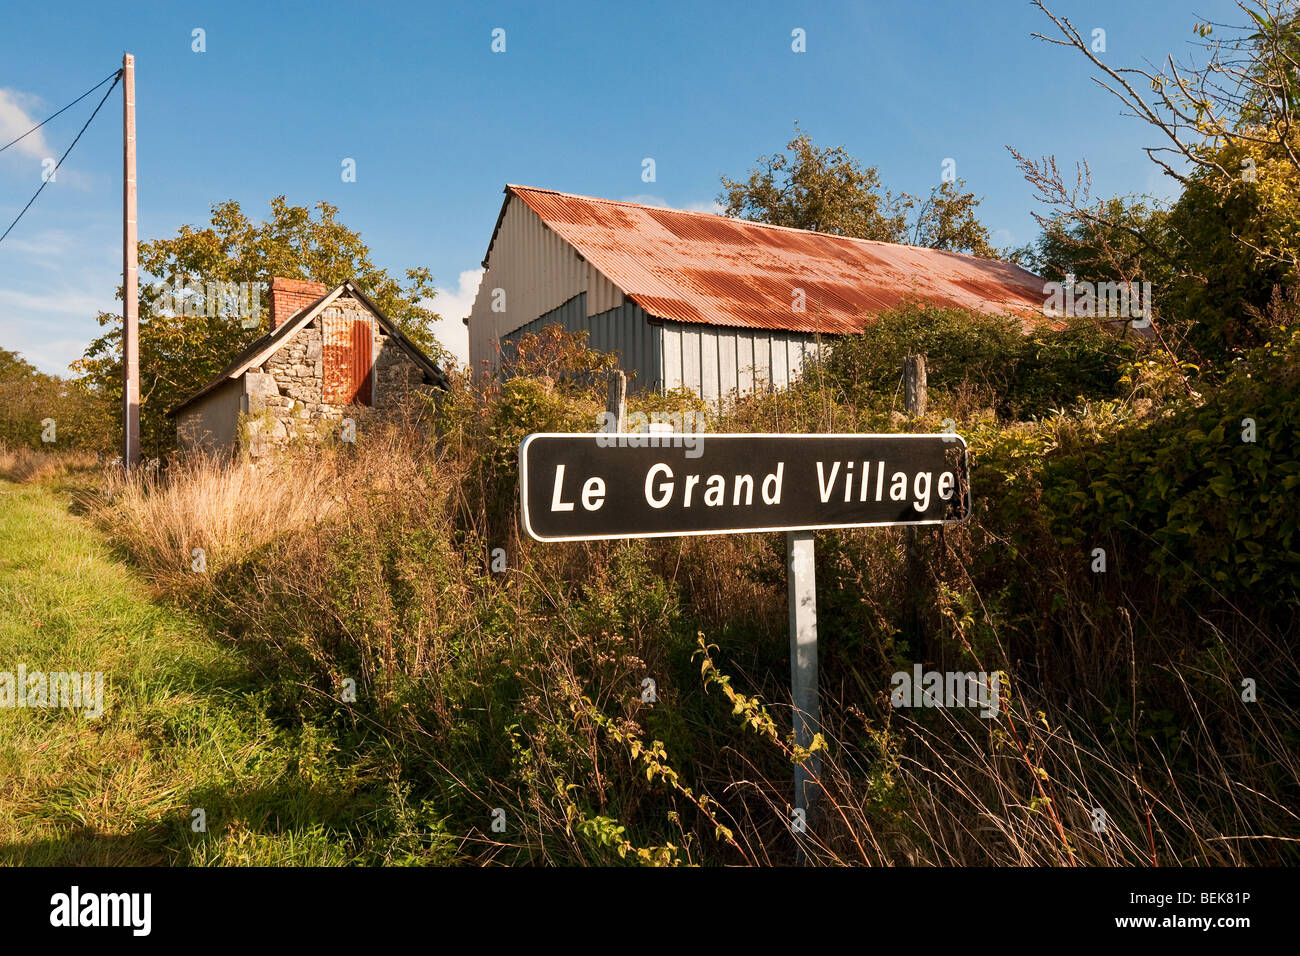 'Le Grand Village' sign for a small village - Indre, France. Stock Photo